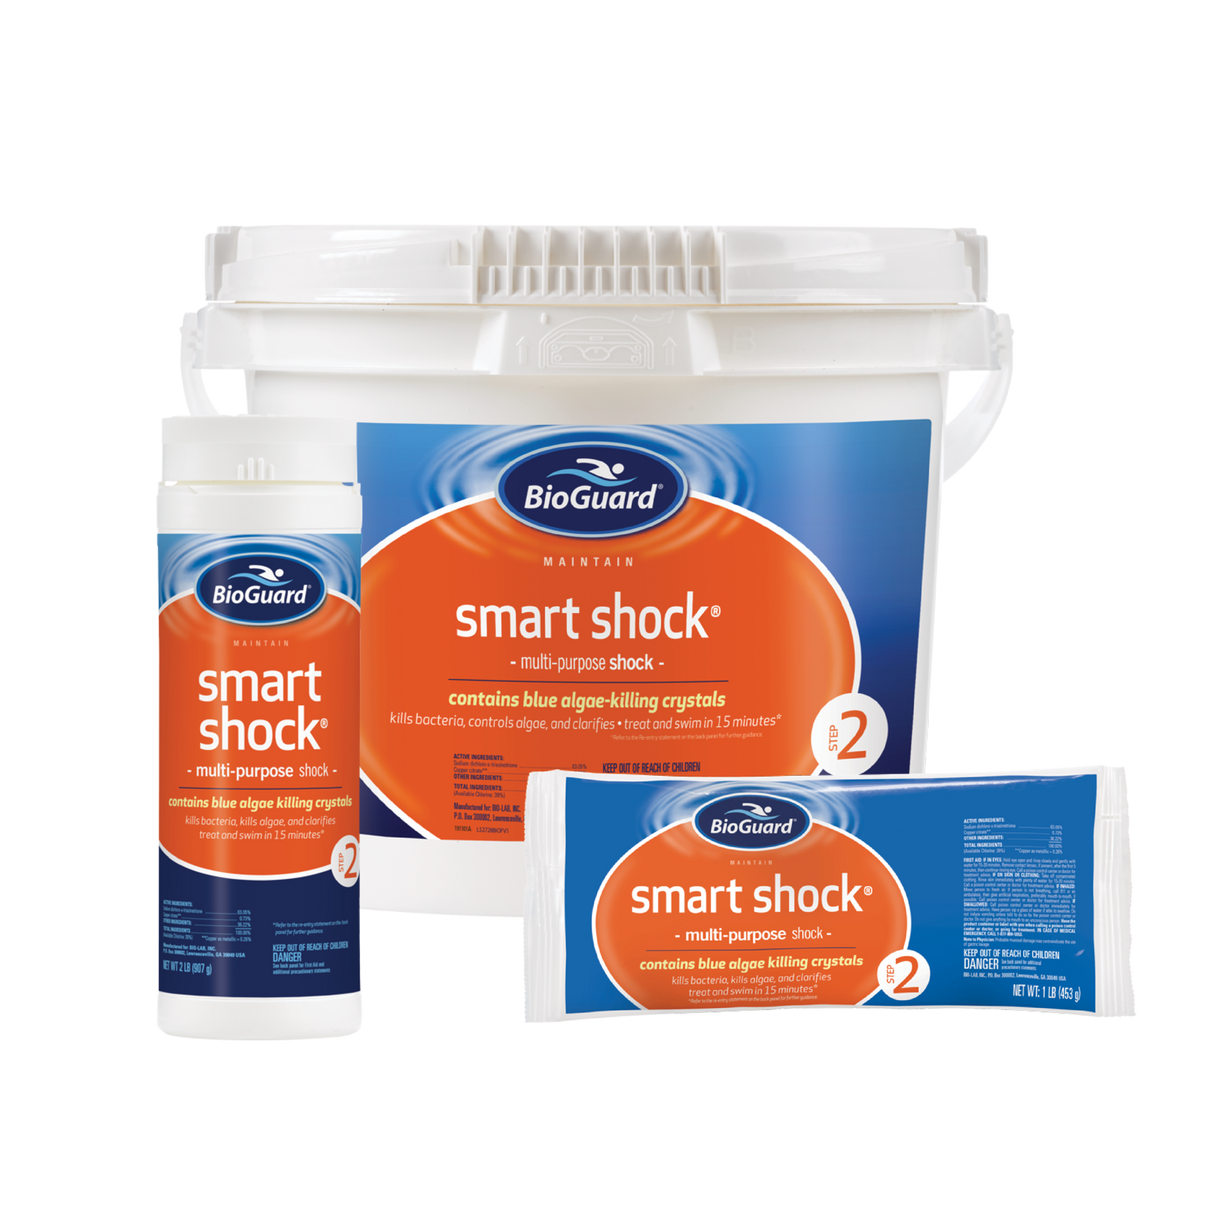 Smart Shock® Product Family